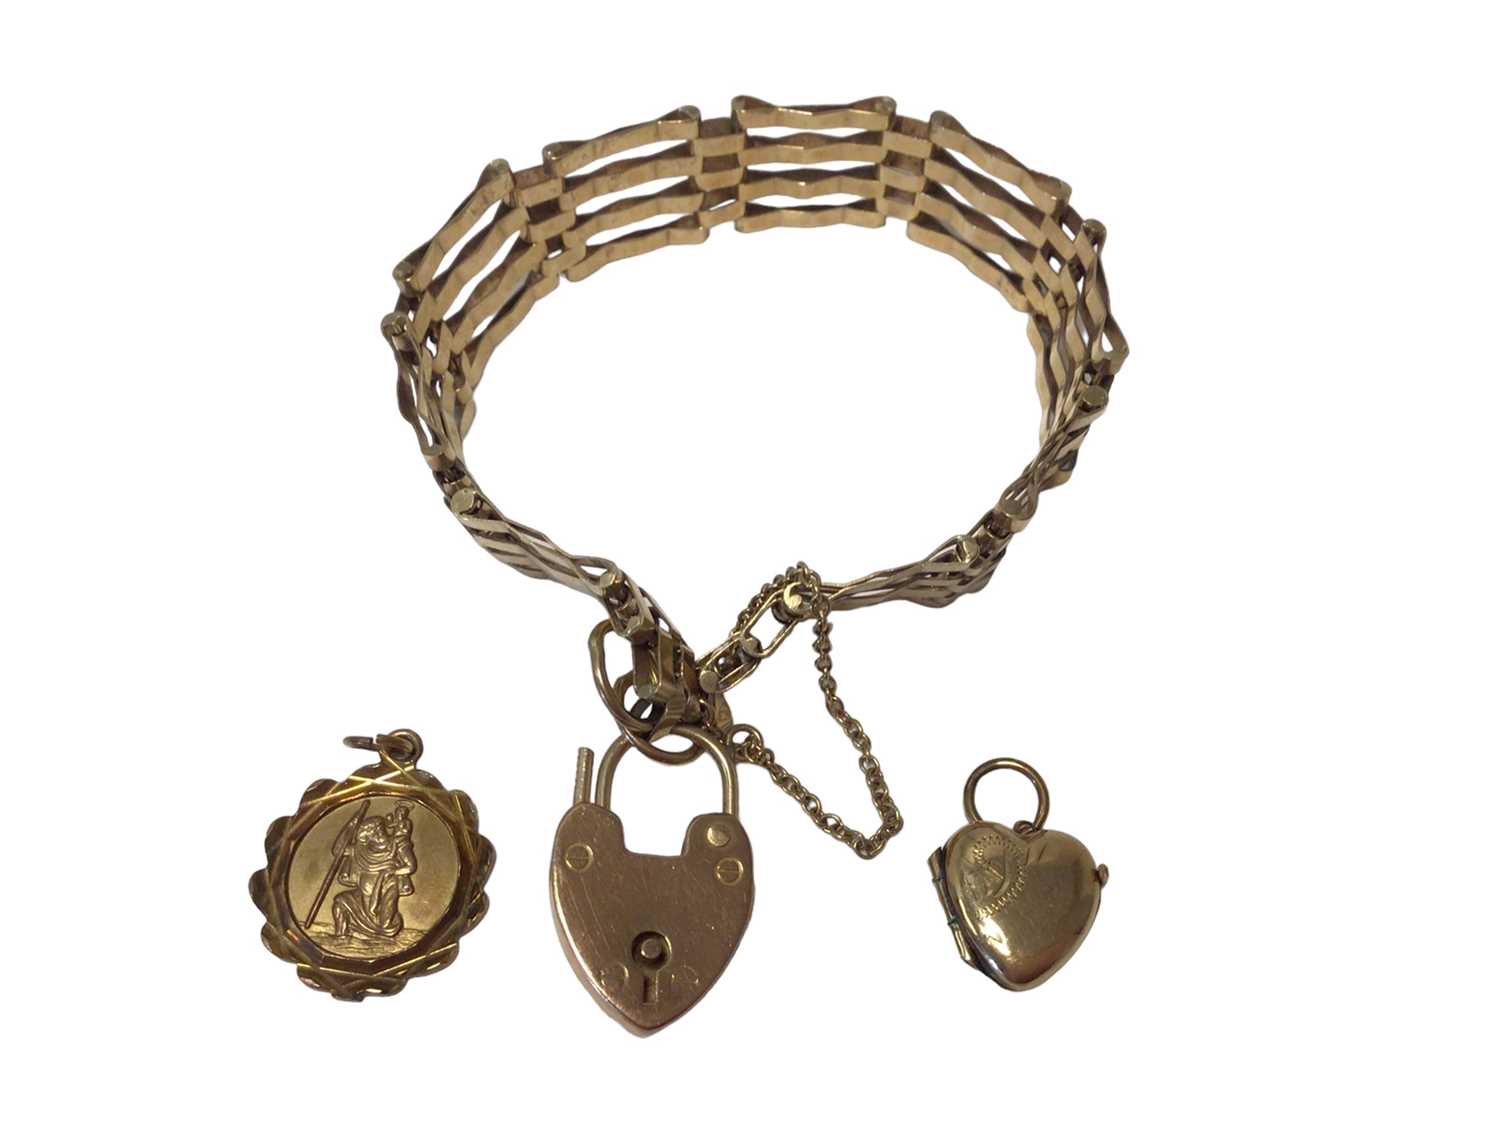 Lot 56 - 9ct gold gate bracelet with padlock clasp, 9ct gold St. Christopher and a 9ct gold heart shaped locket (3)